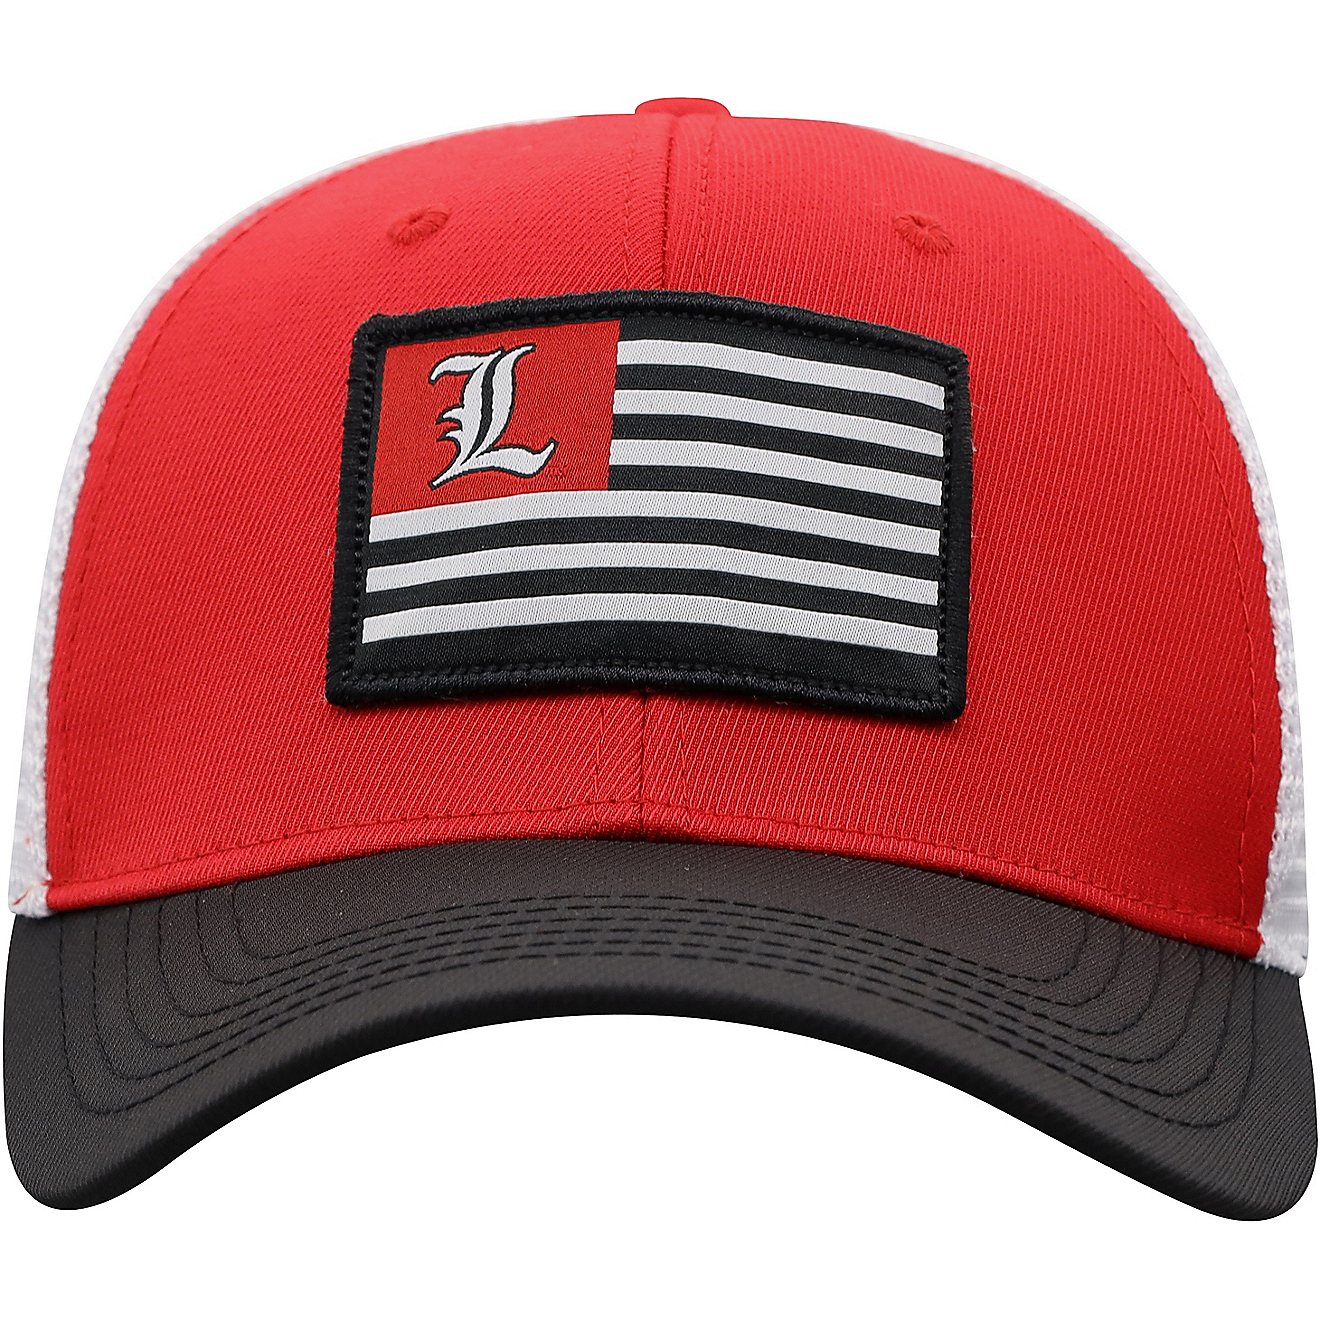 Top of the World University of Louisville Pedigree 1 Fit Cap                                                                     - view number 3